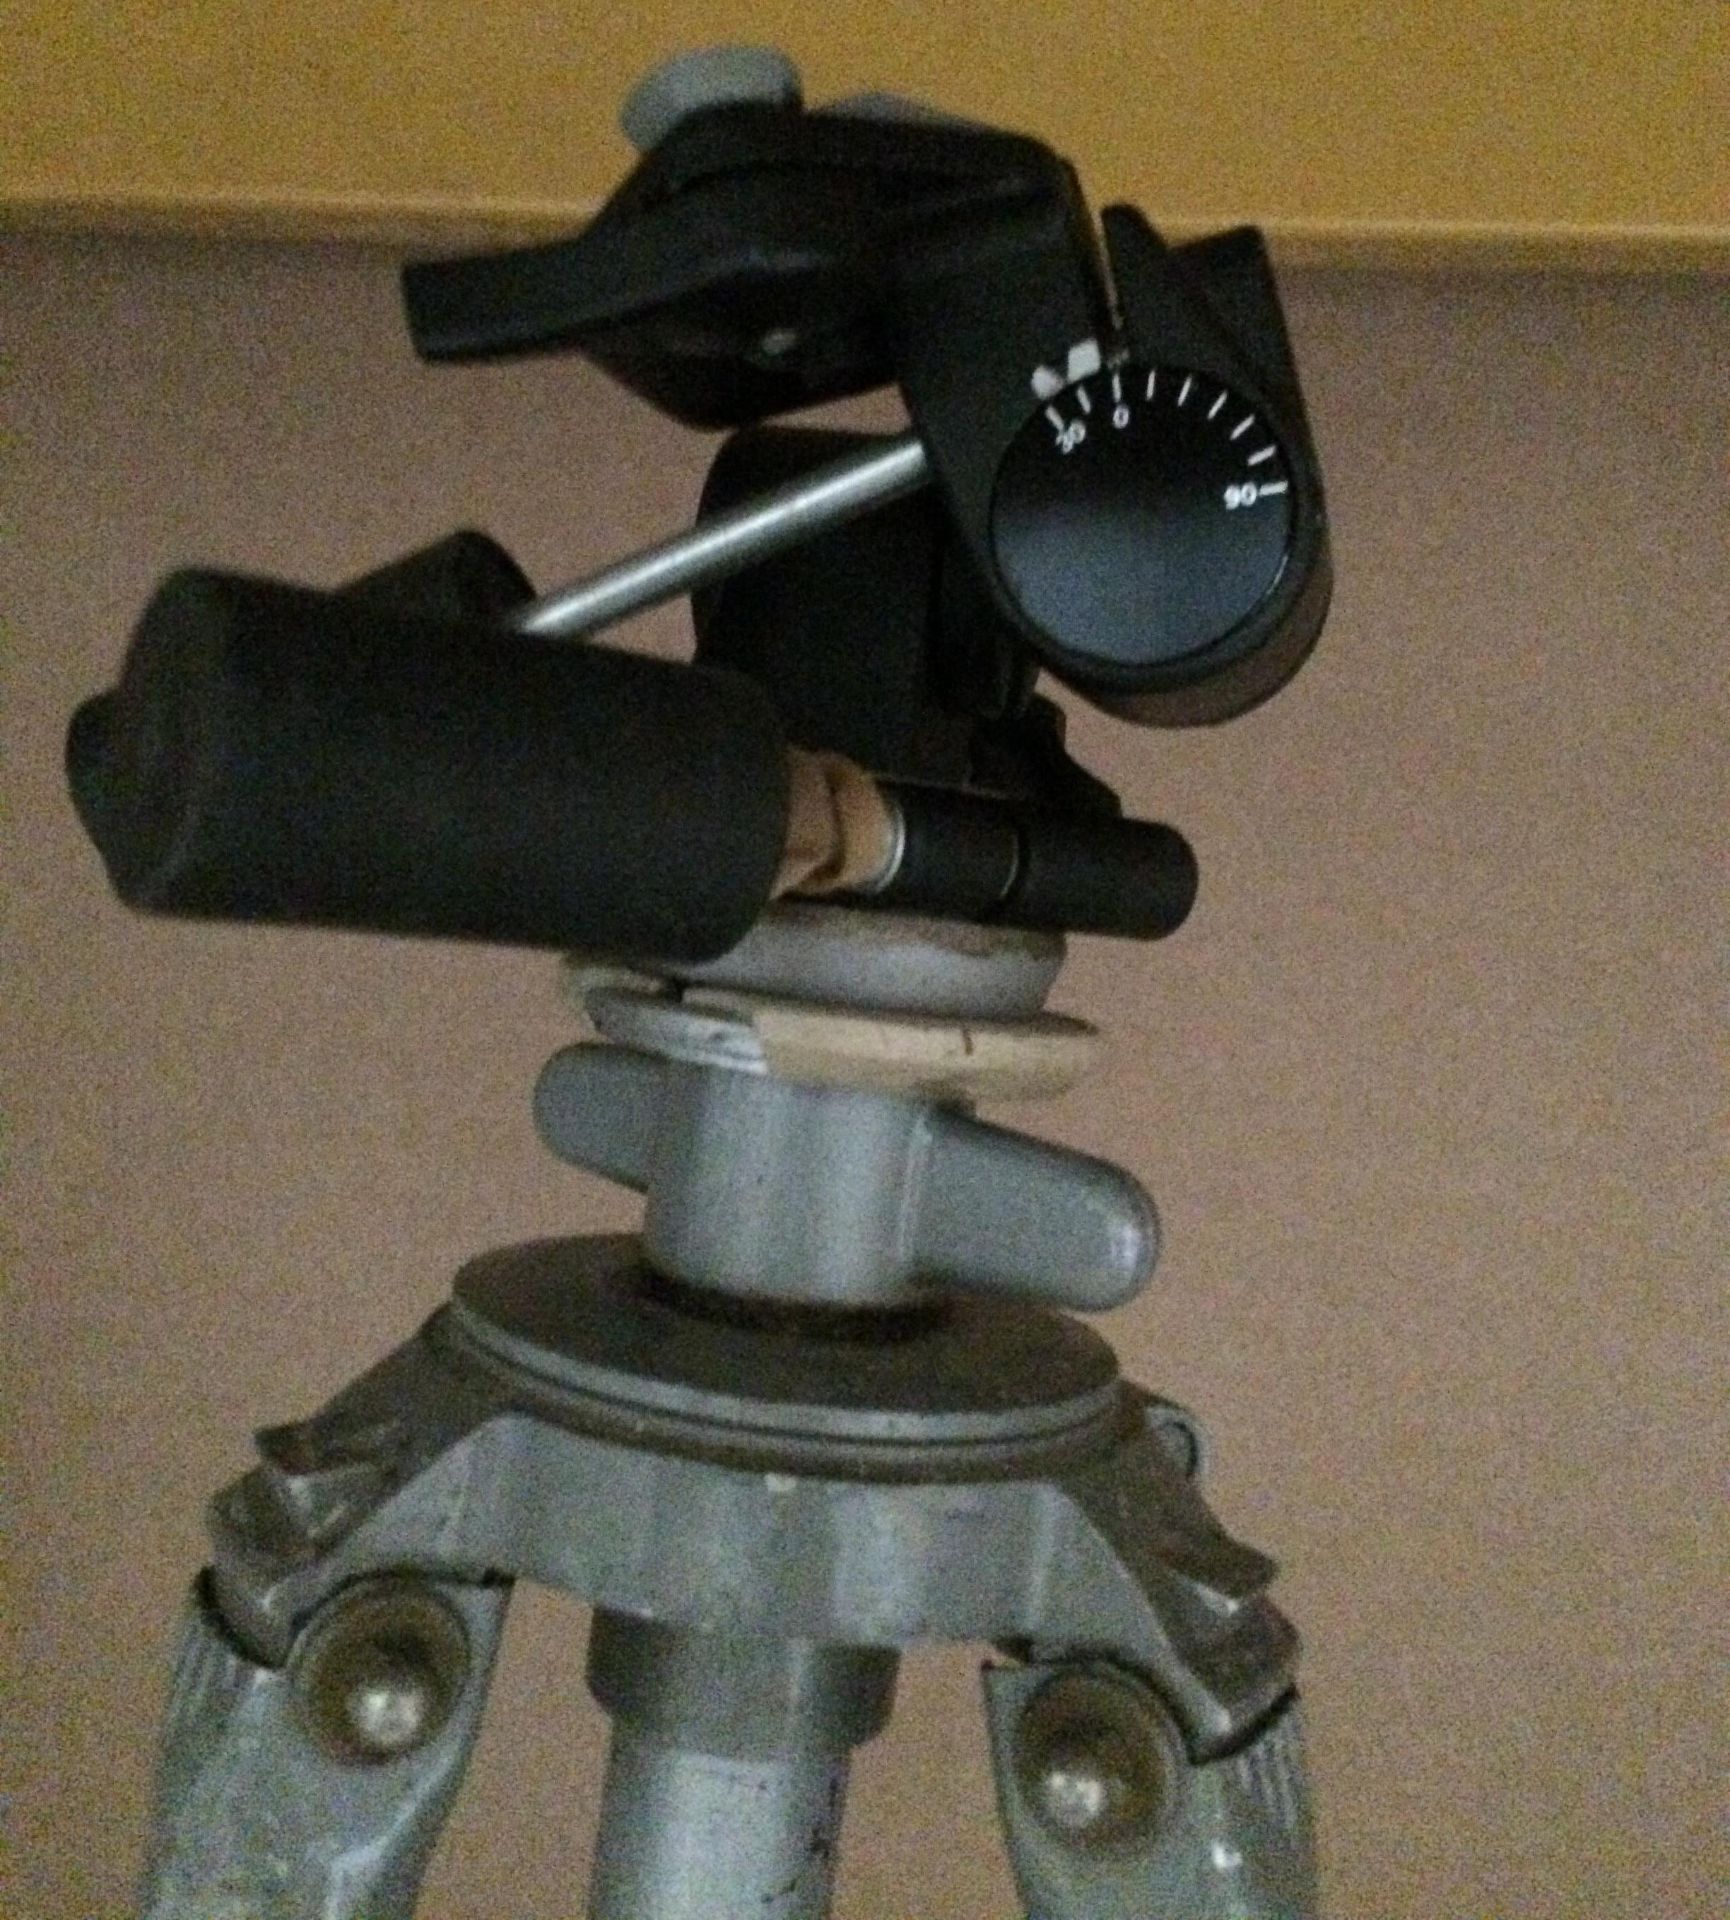 Manfrotto 160 tripod stand - Image 2 of 2